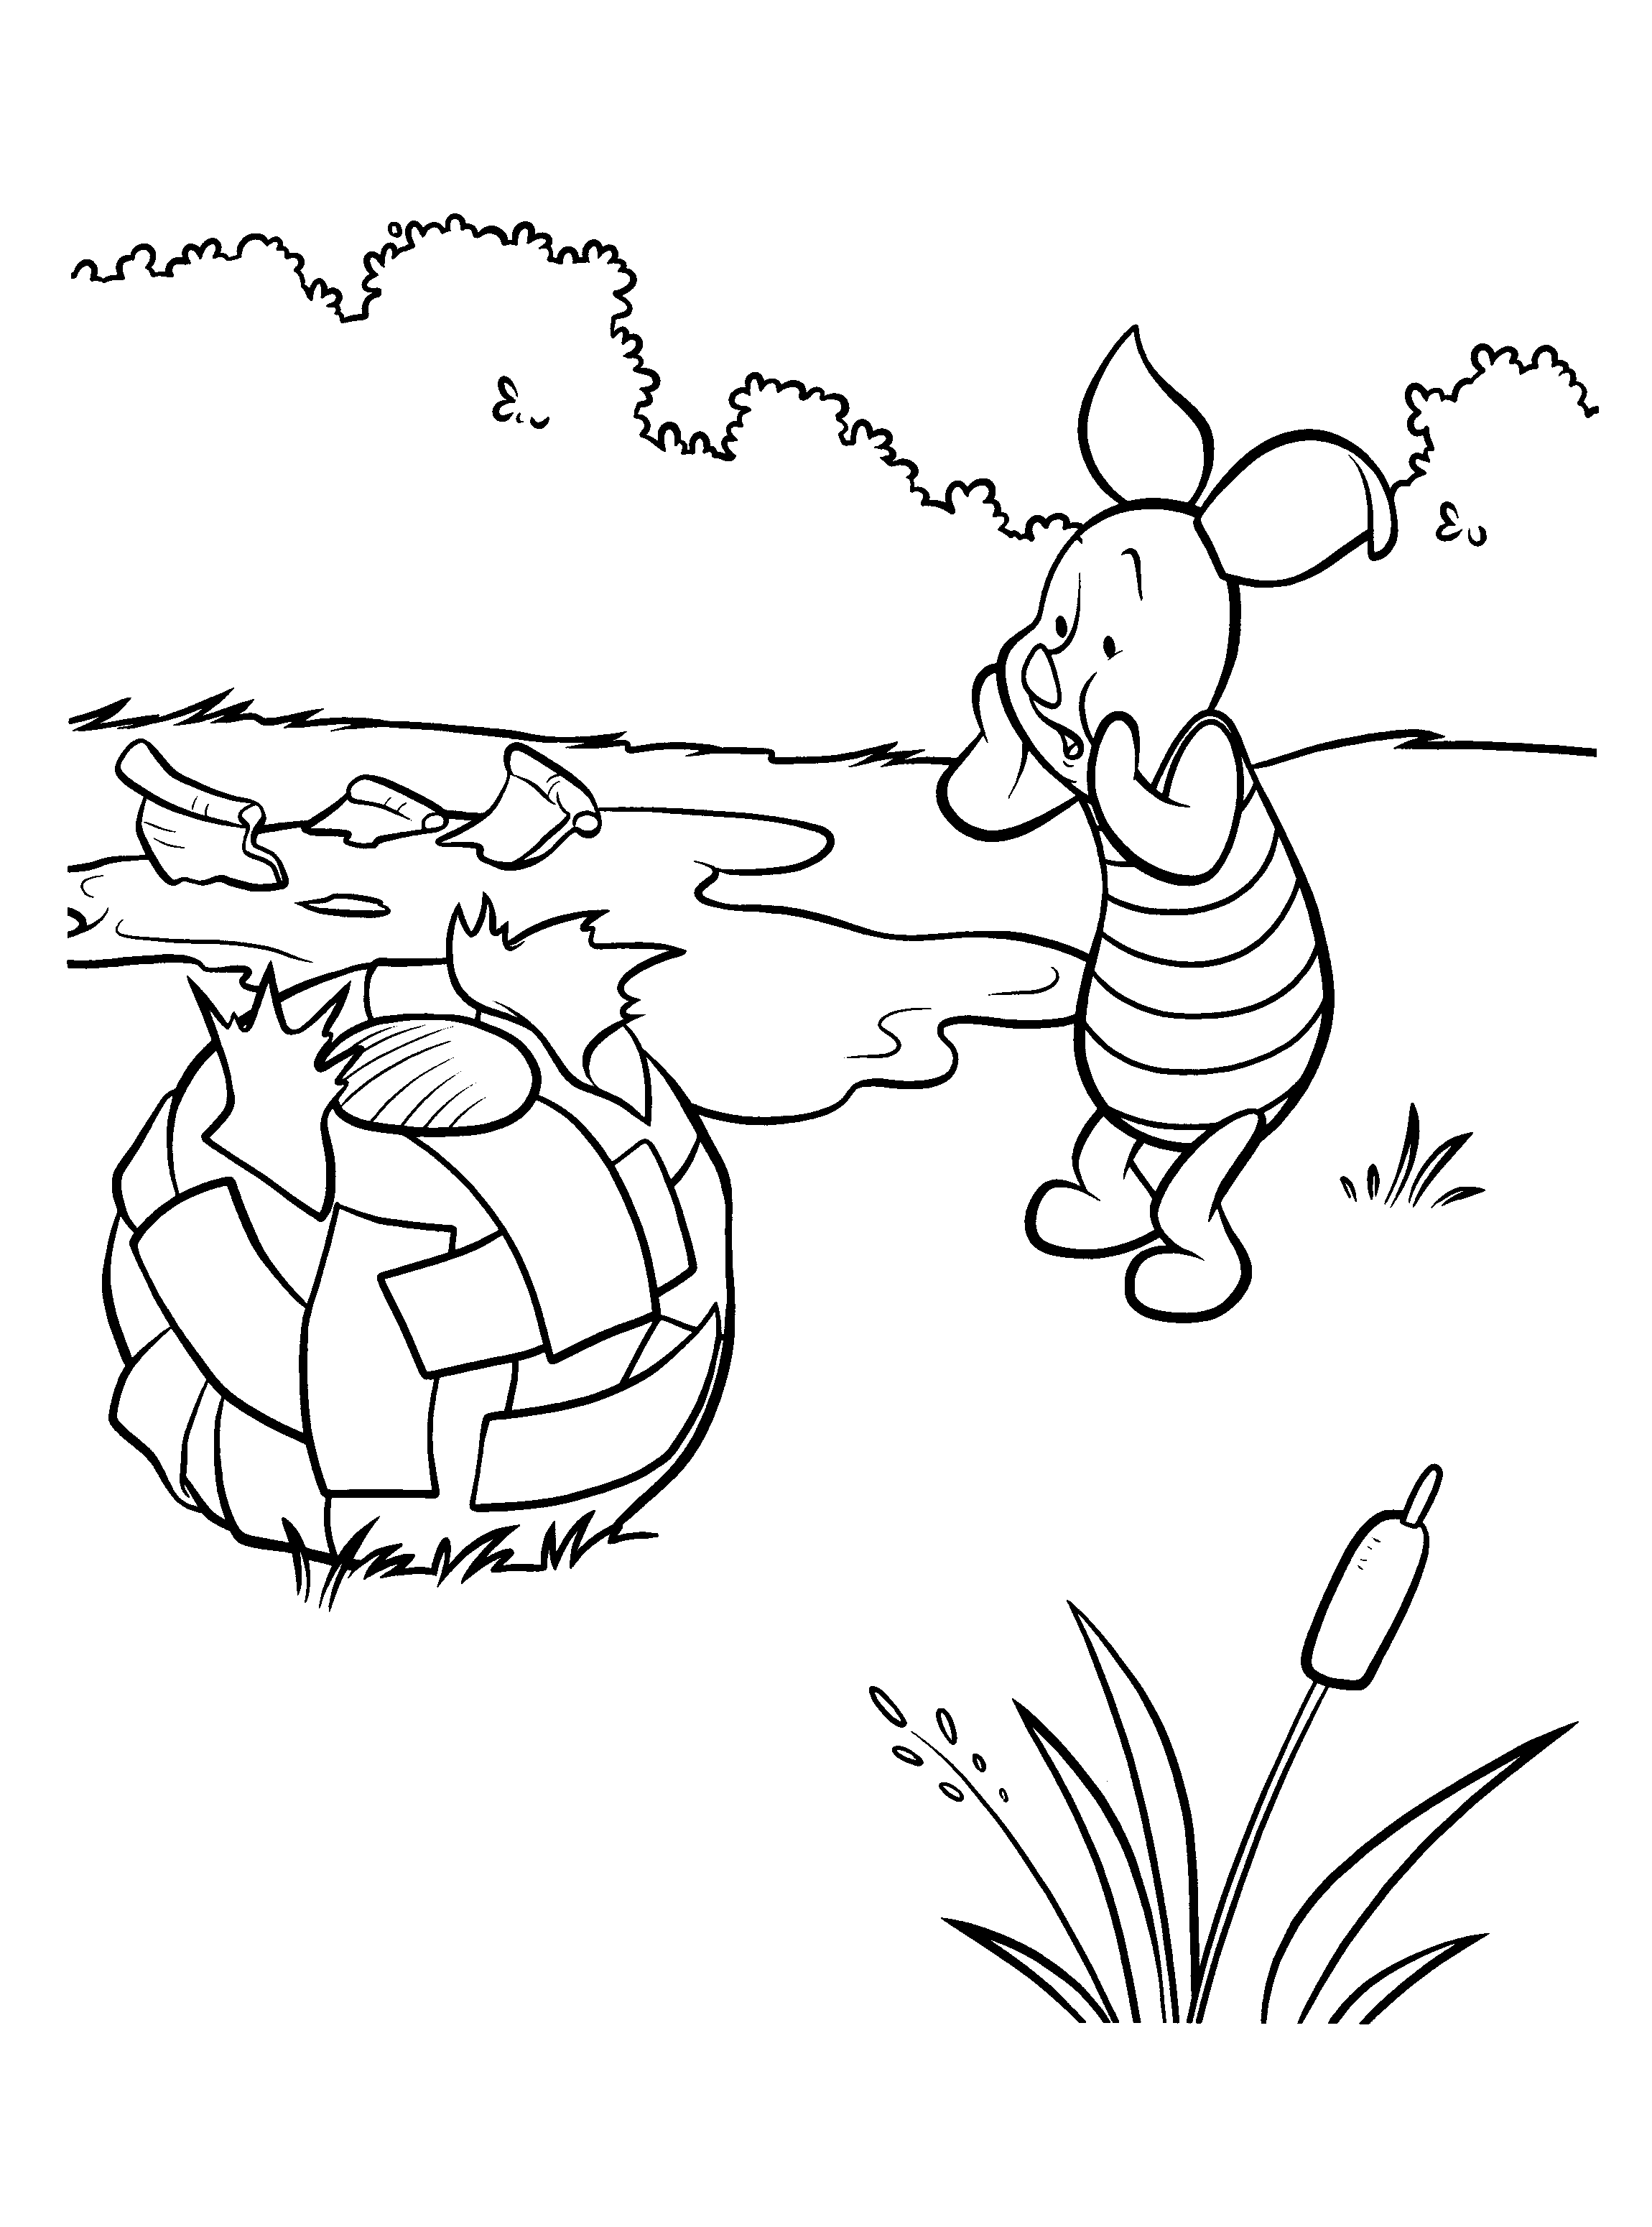 animated-coloring-pages-winnie-the-pooh-image-0083